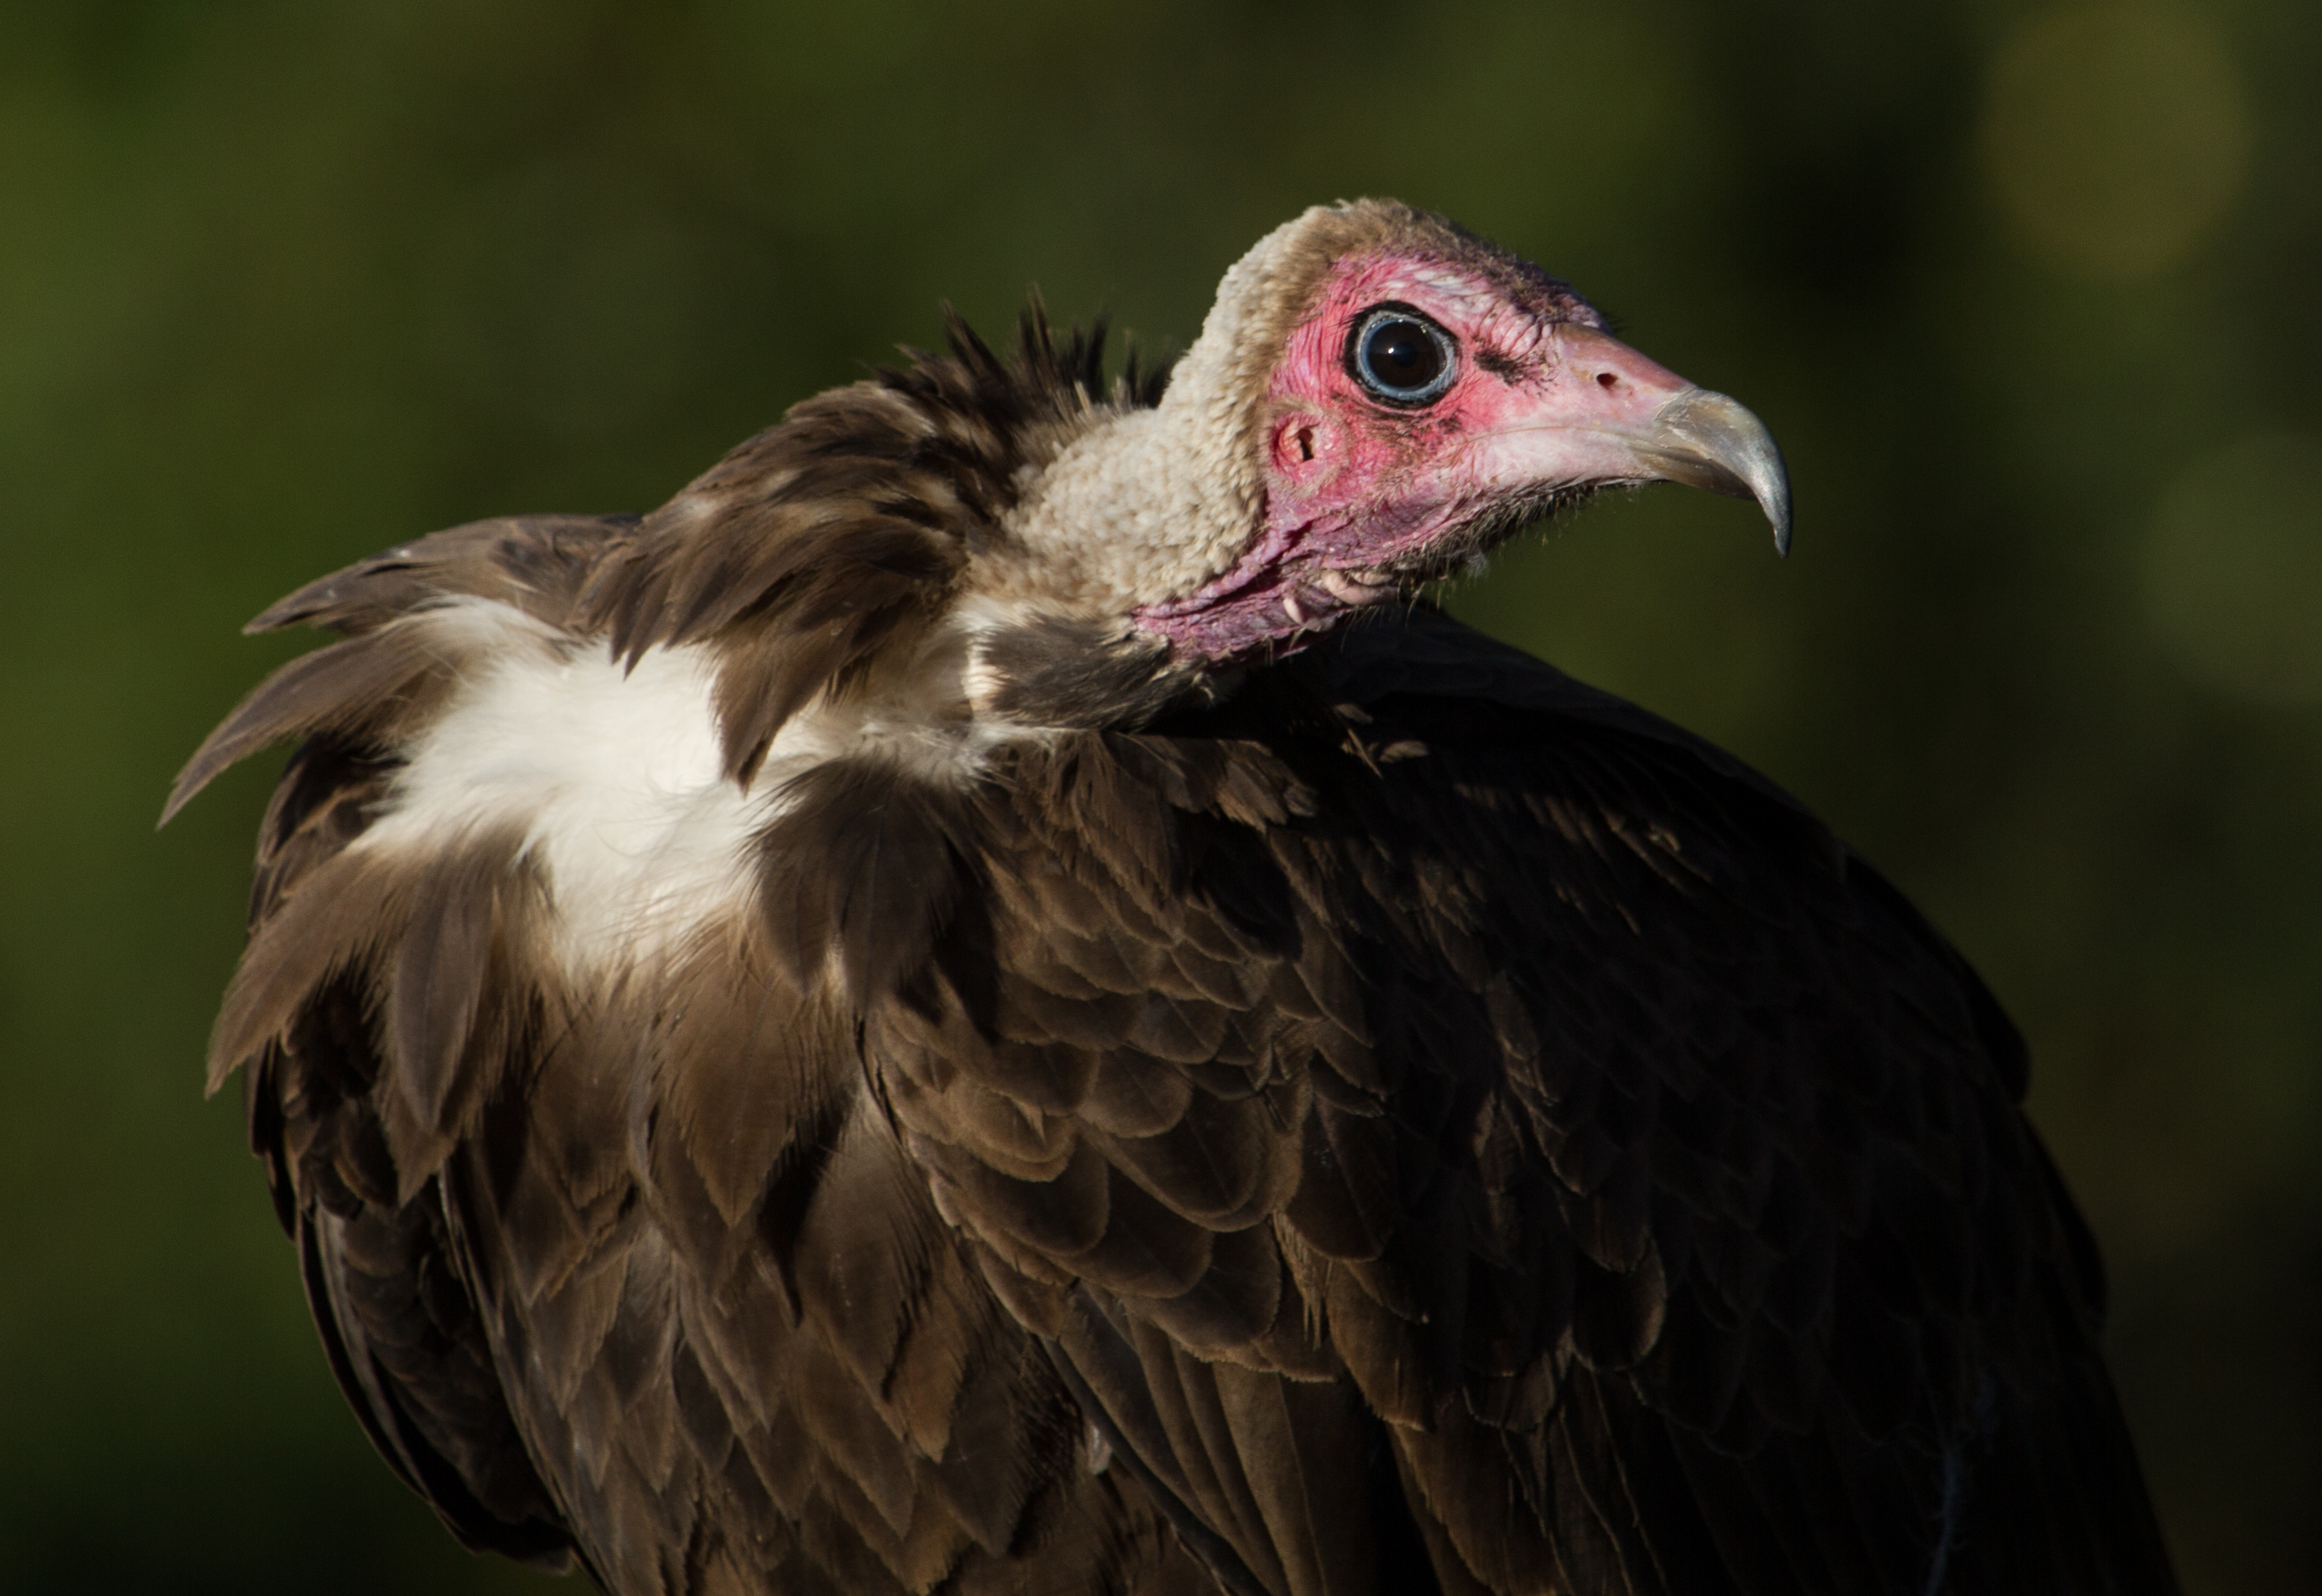 Why vultures matter – and what we lose if they're gone | UNews